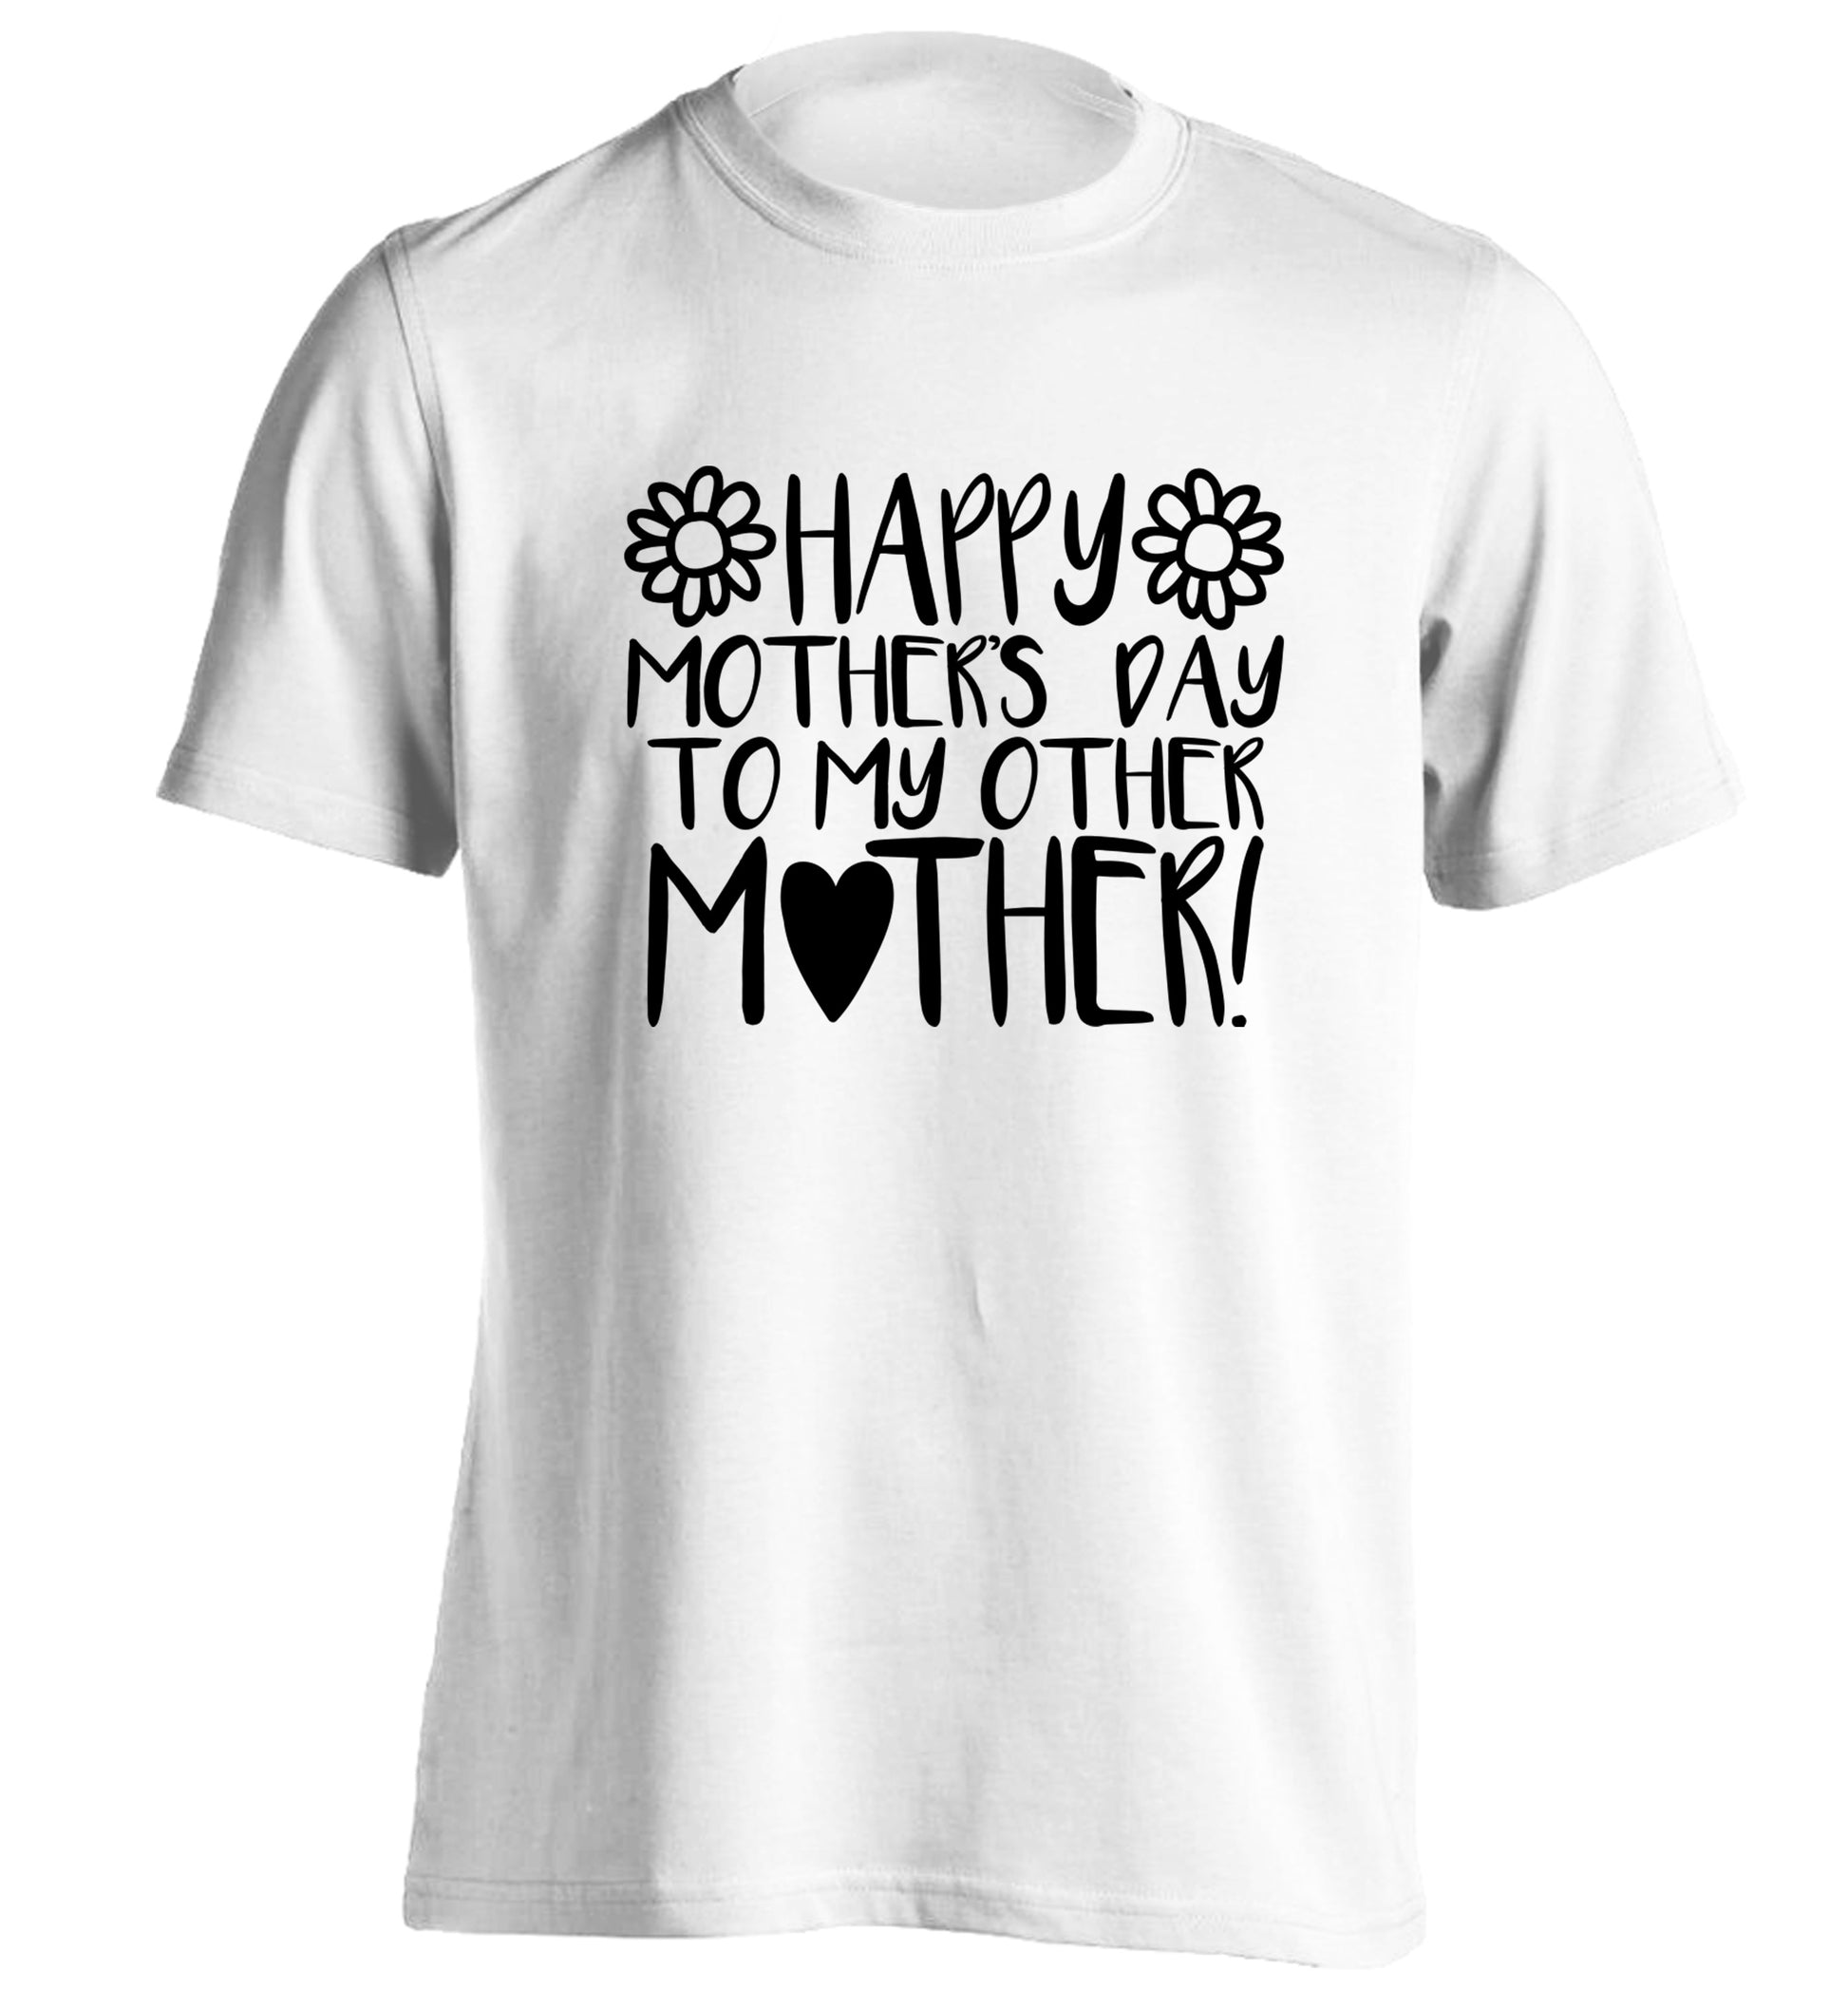 Happy mother's day to my other mother adults unisex white Tshirt 2XL